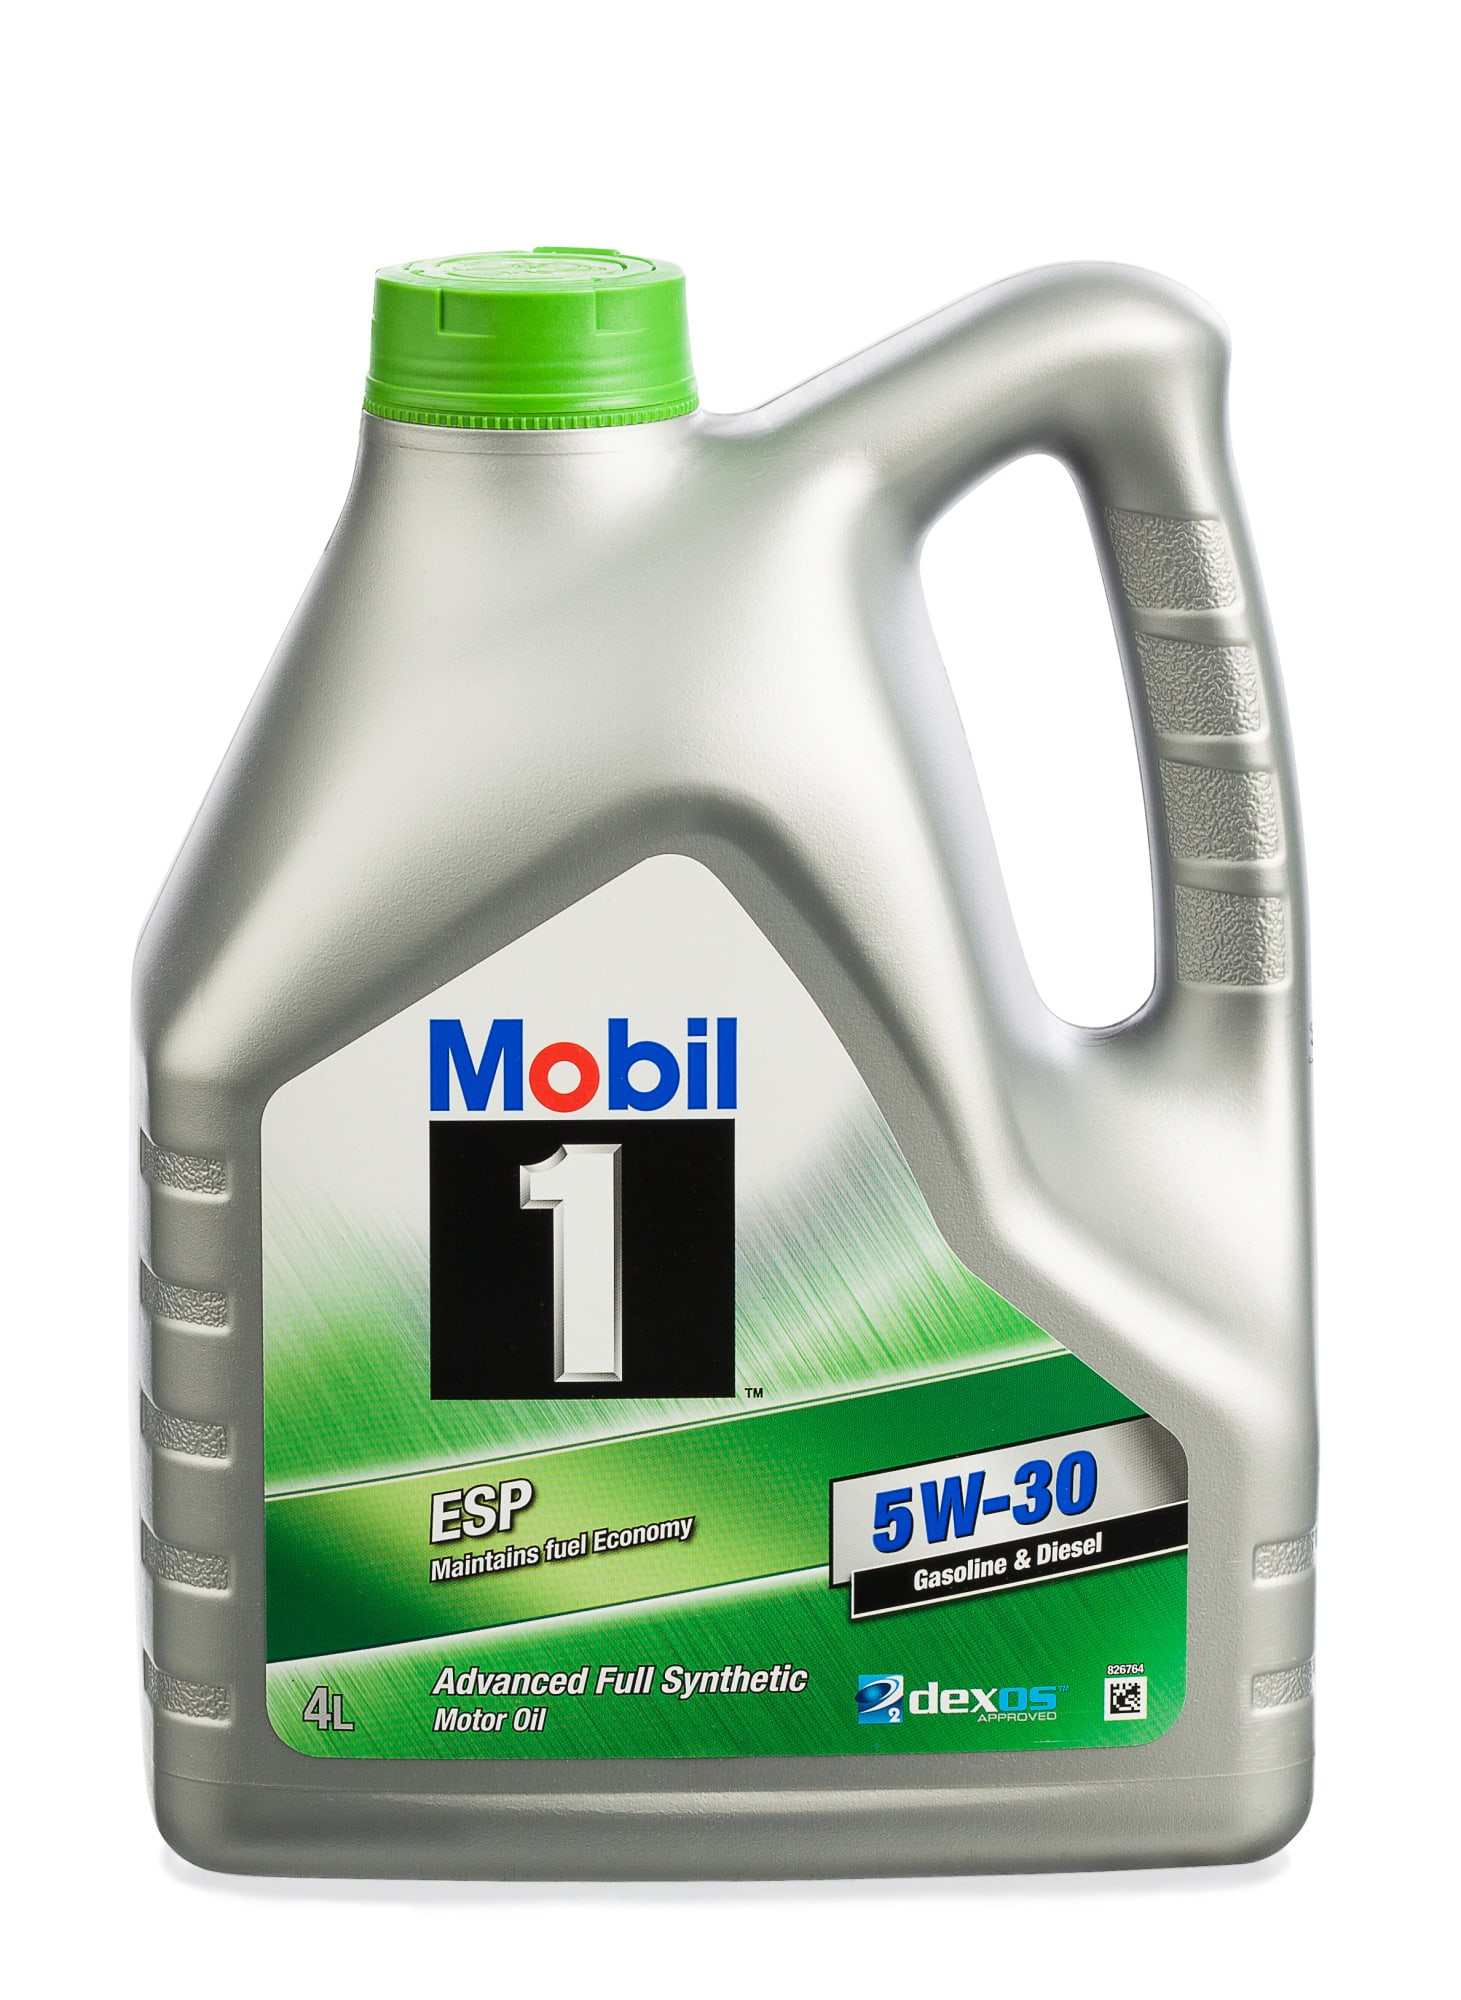 When Did Mobil 1 Come Out